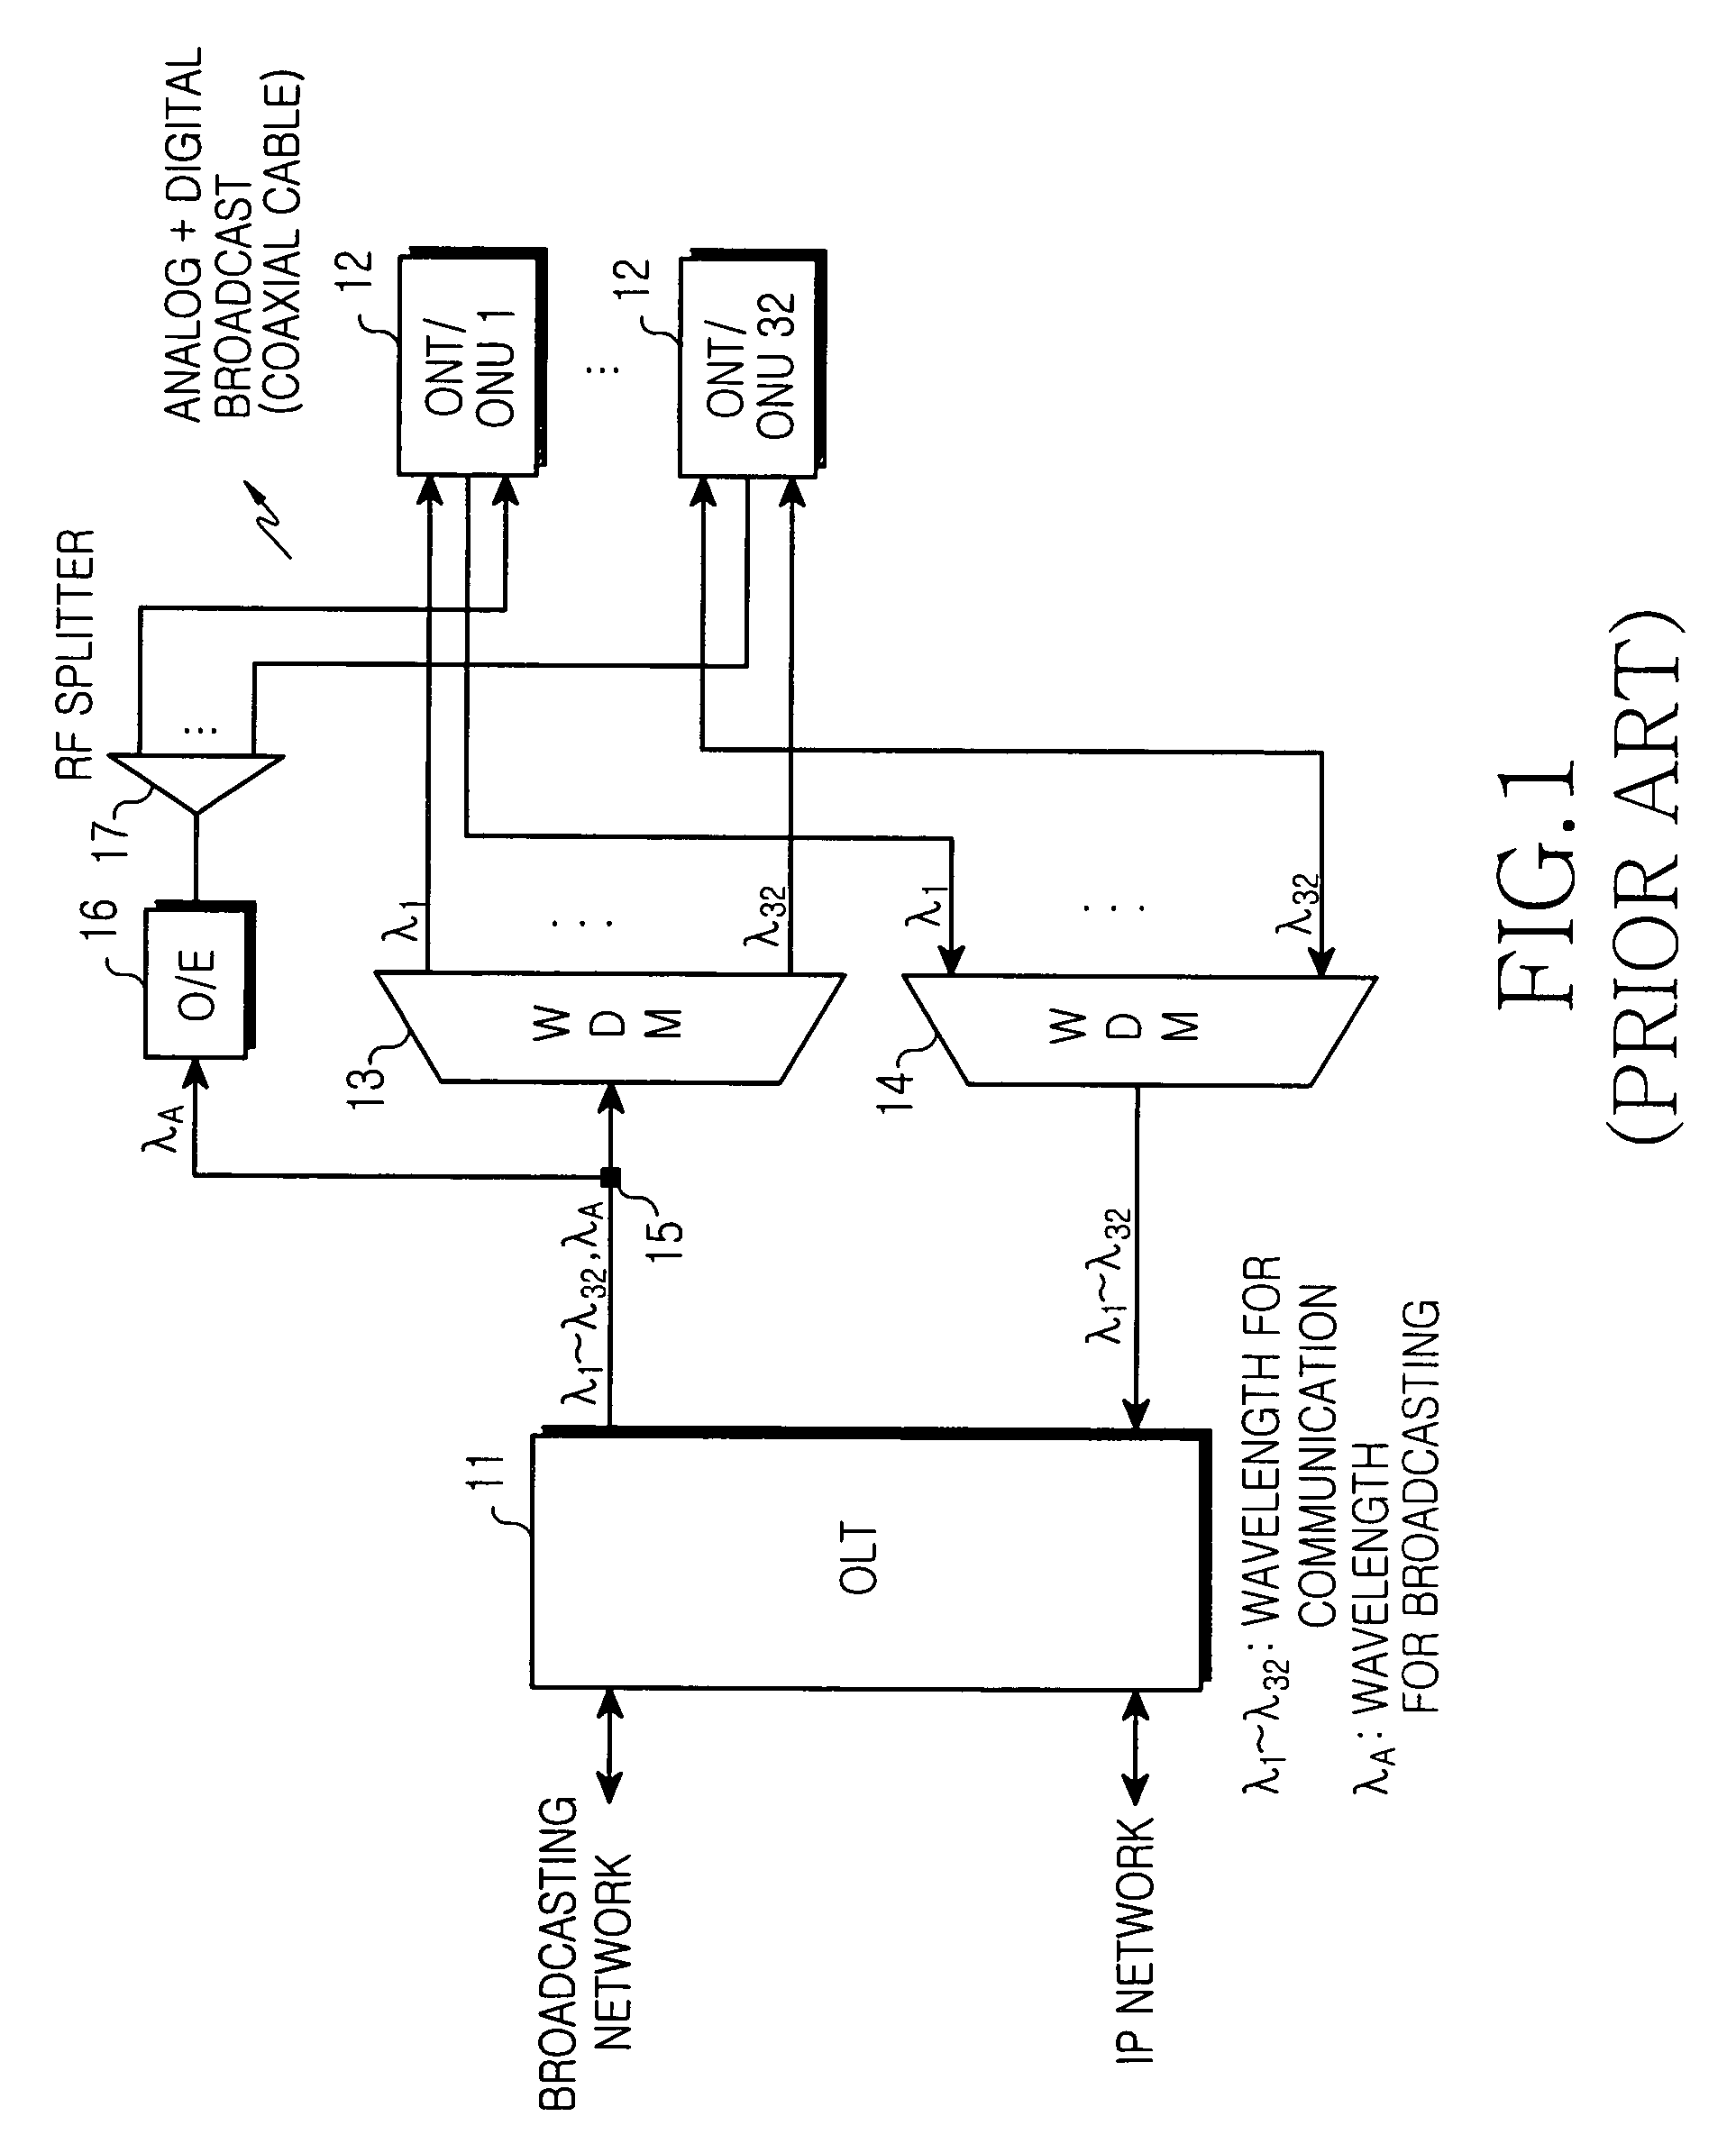 Wavelength division multiplexing-passive optical network capable of integrating broadcast and communication services